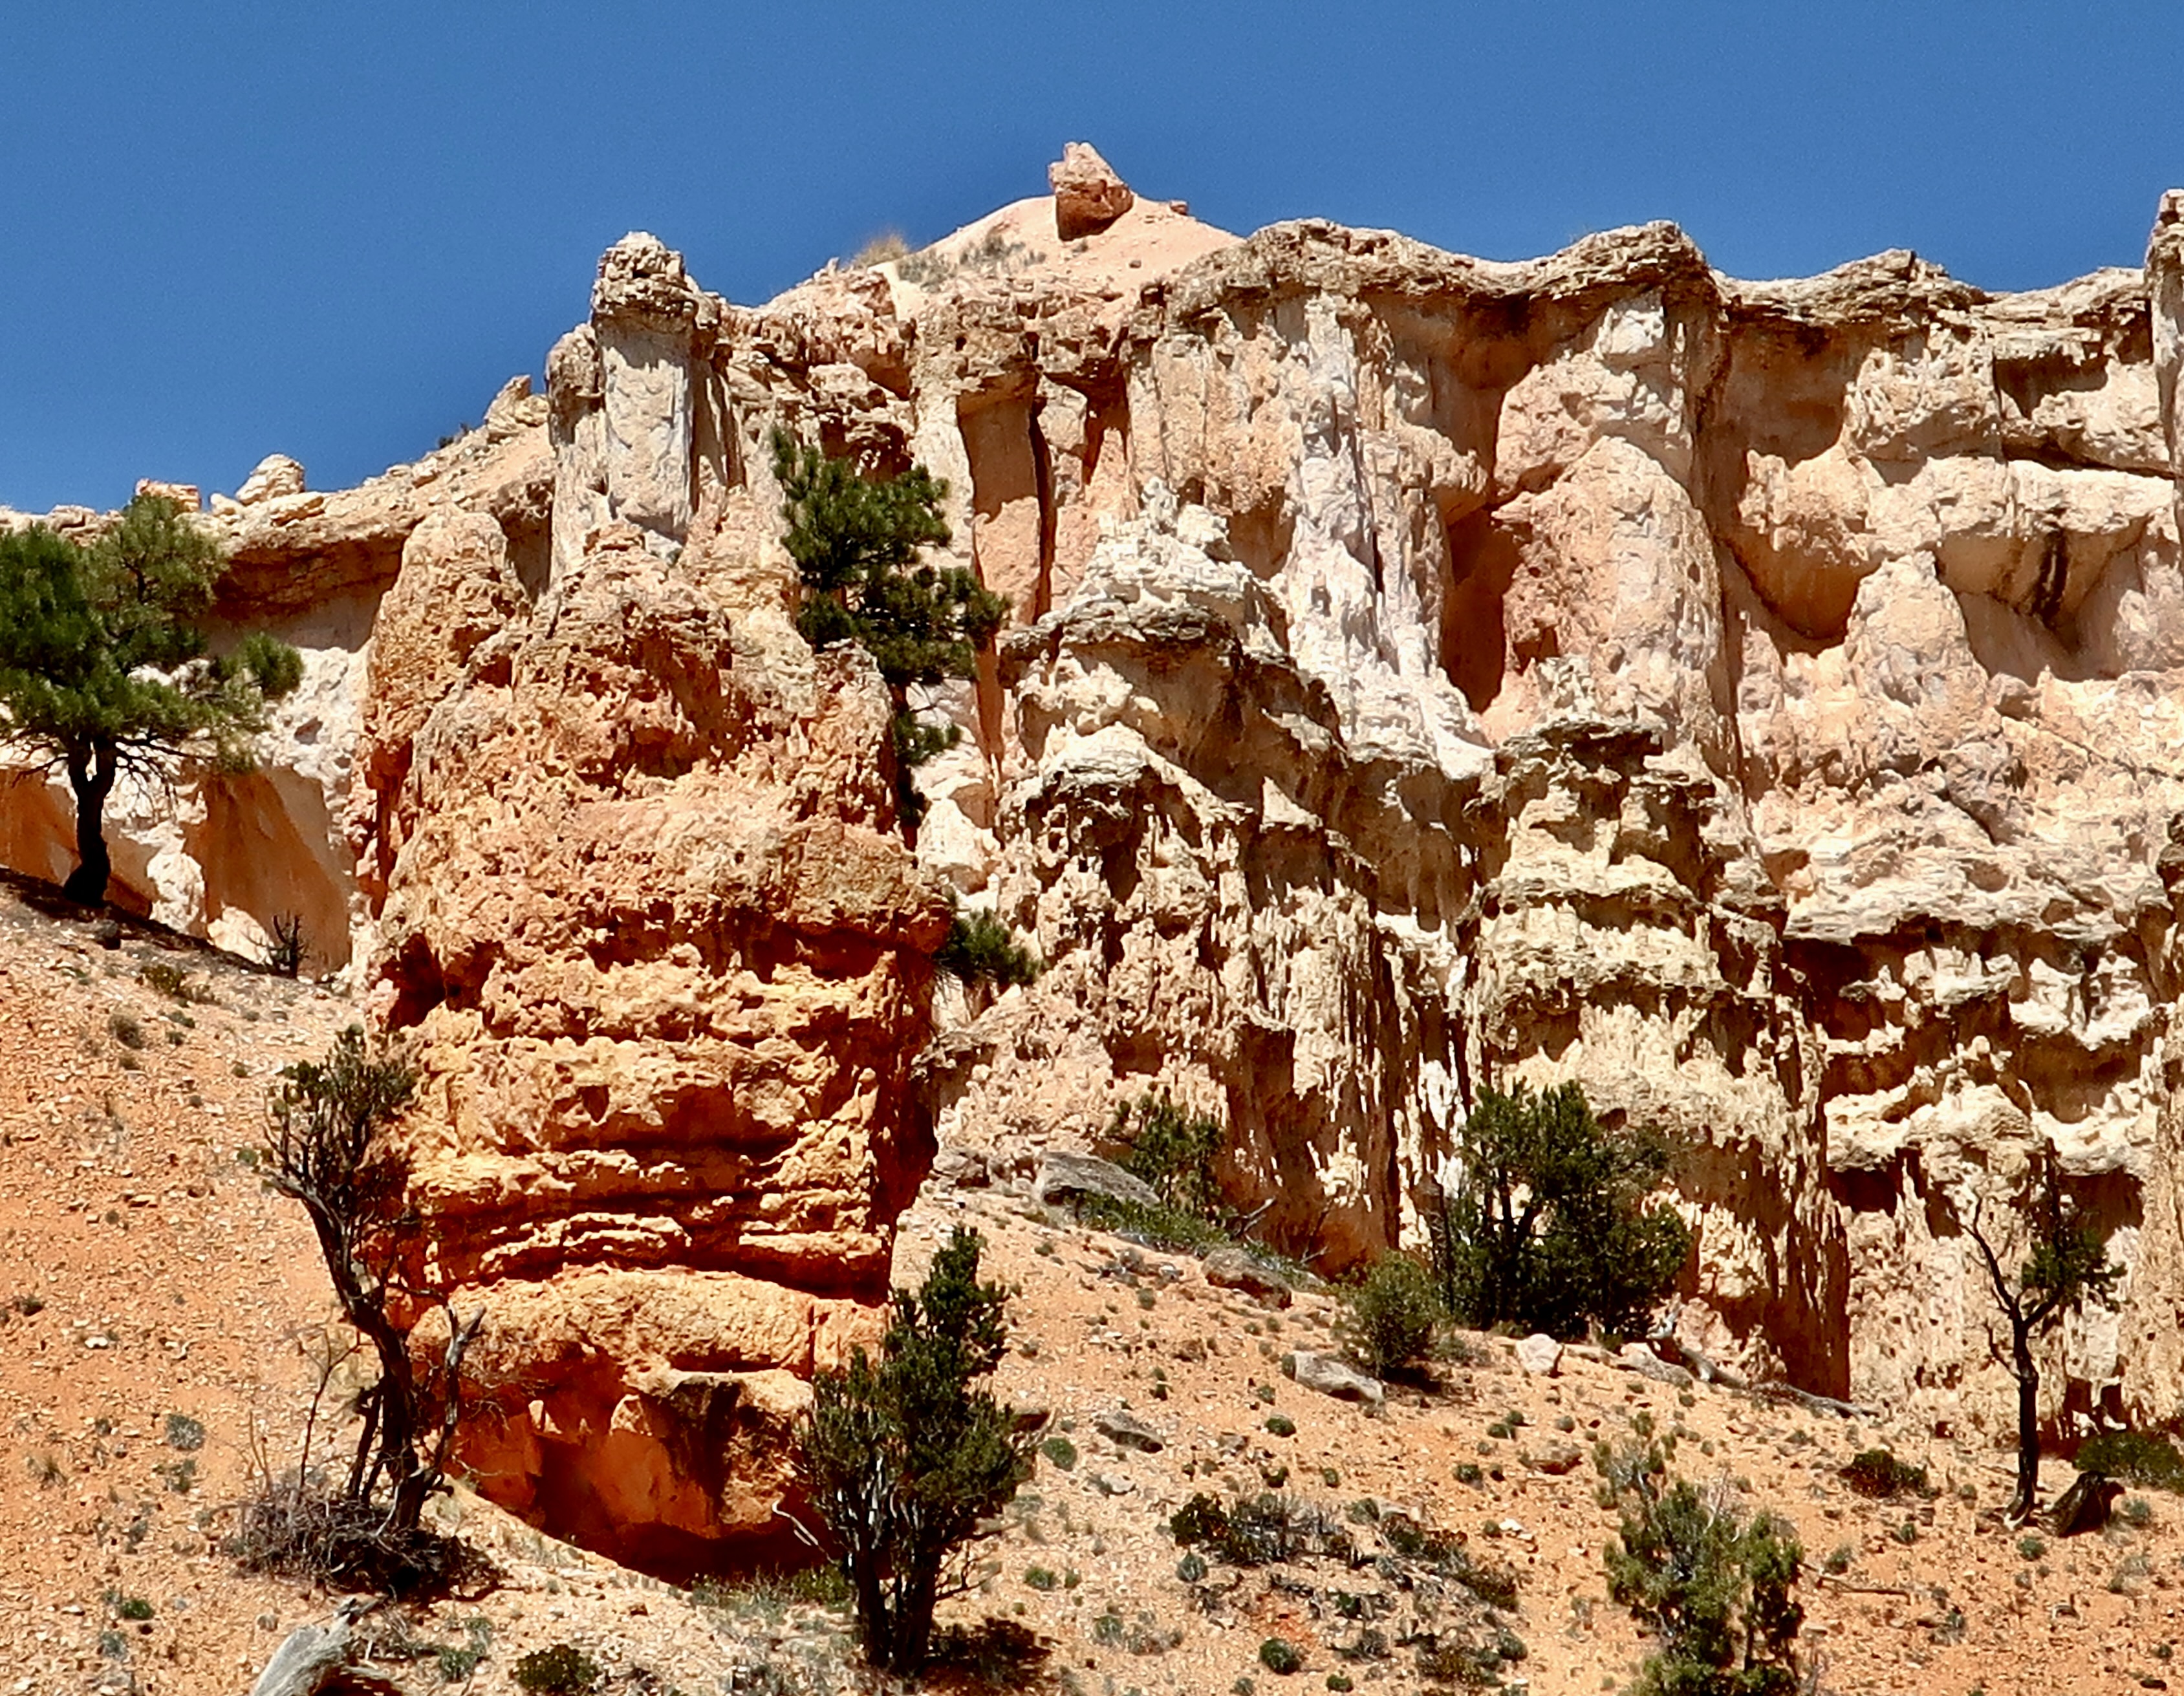 Photo of Hoodoo with dramatic background along Mossy Cave Trail in Bryce National Park by Curt Mekemson.